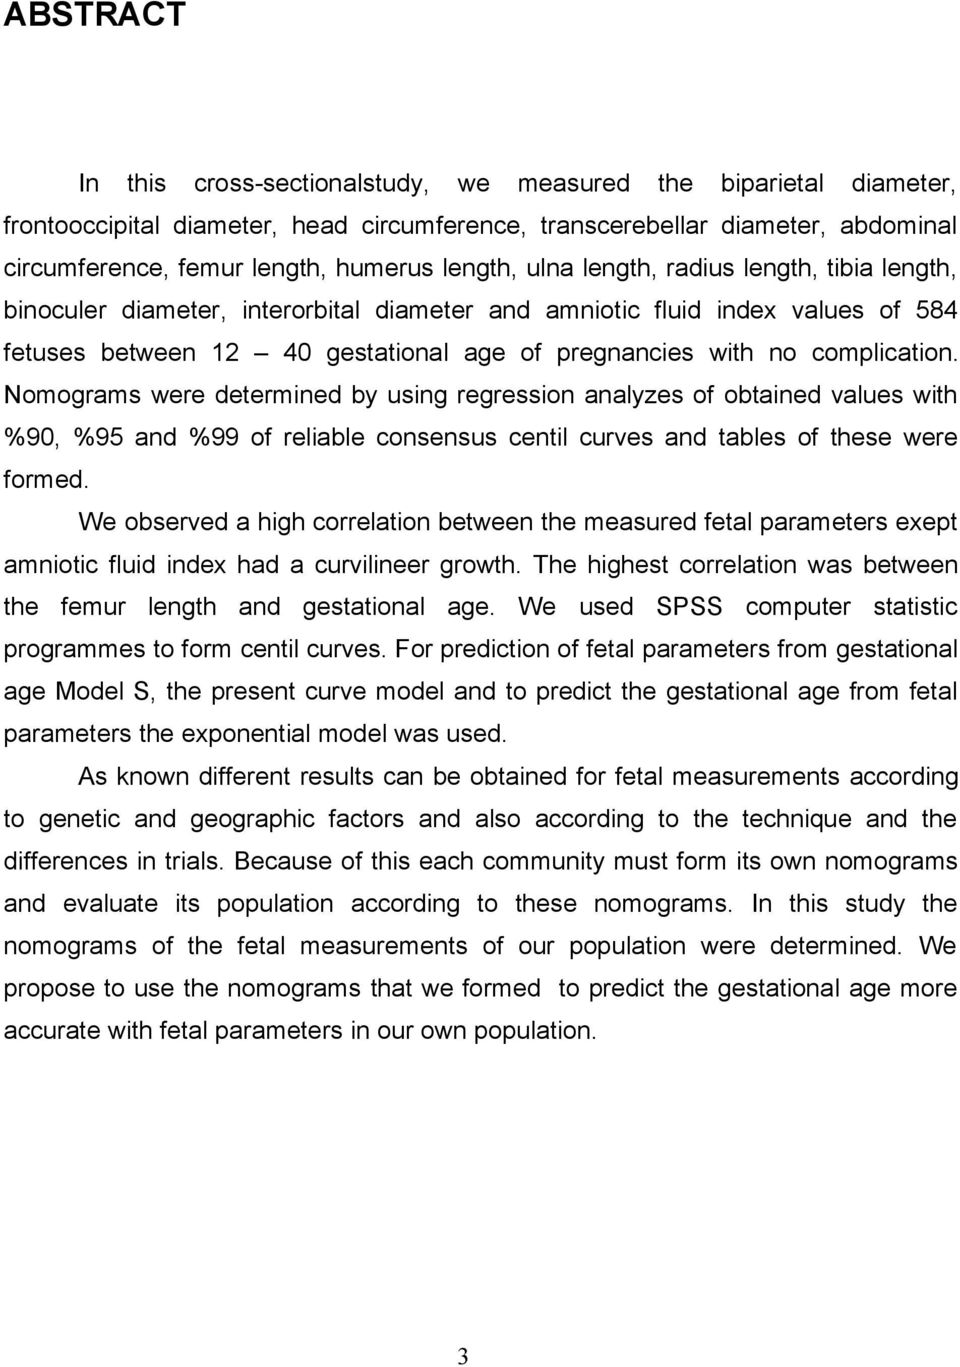 complication. Nomograms were determined by using regression analyzes of obtained values with %90, %95 and %99 of reliable consensus centil curves and tables of these were formed.